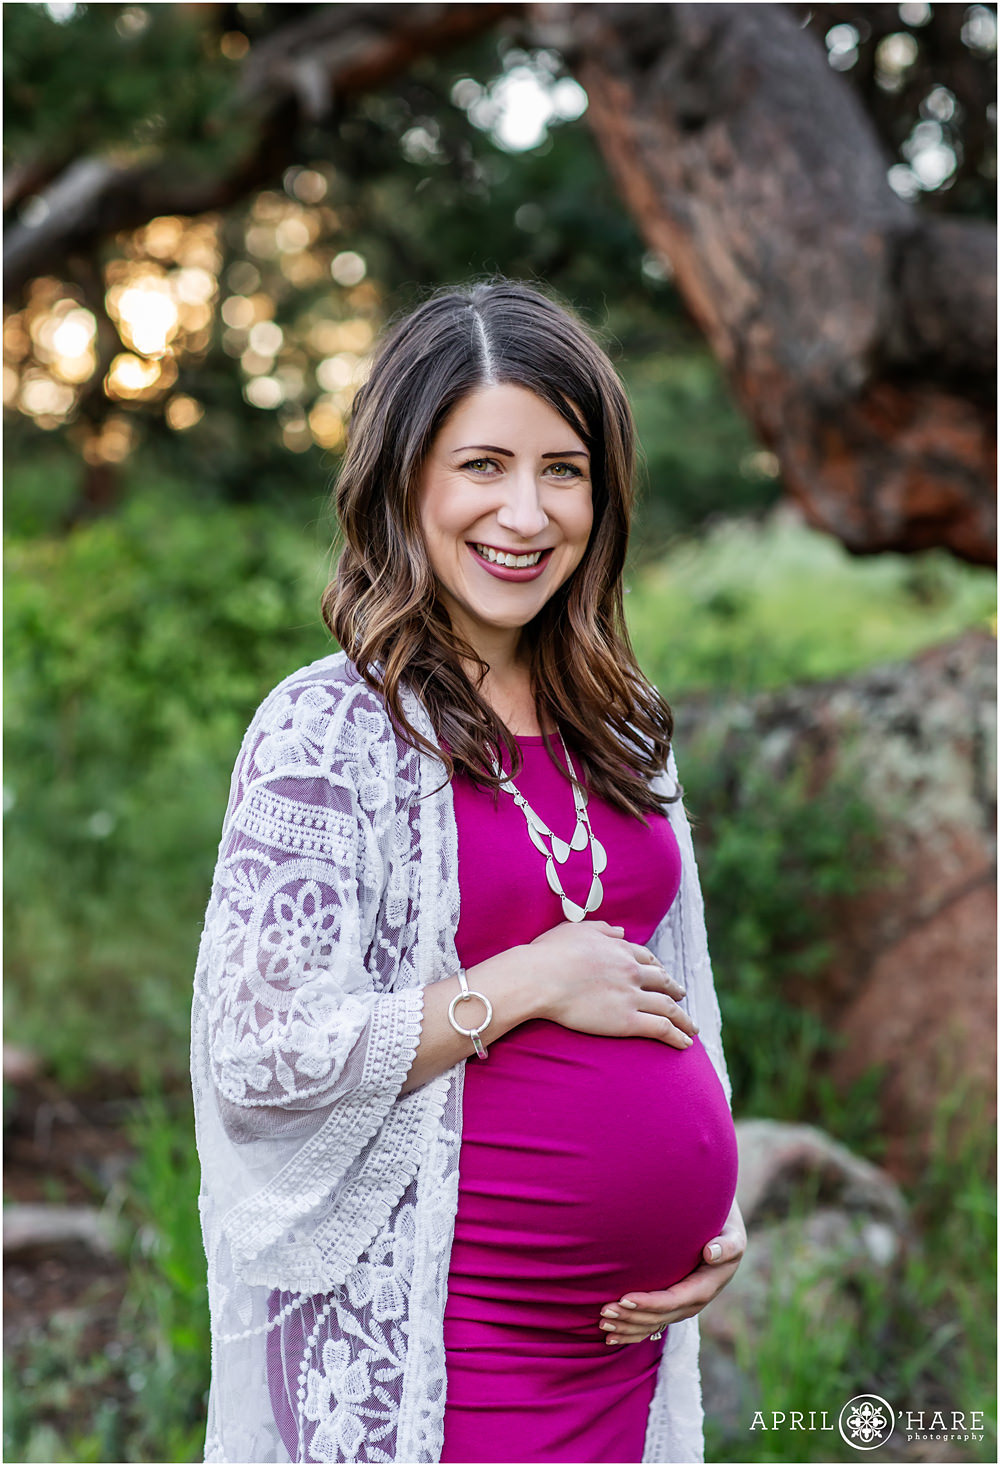 Beautiful Maternity Portrait of a Mom to Be in a Pretty Fuschia Dress at Mount Falcon in Evergreen